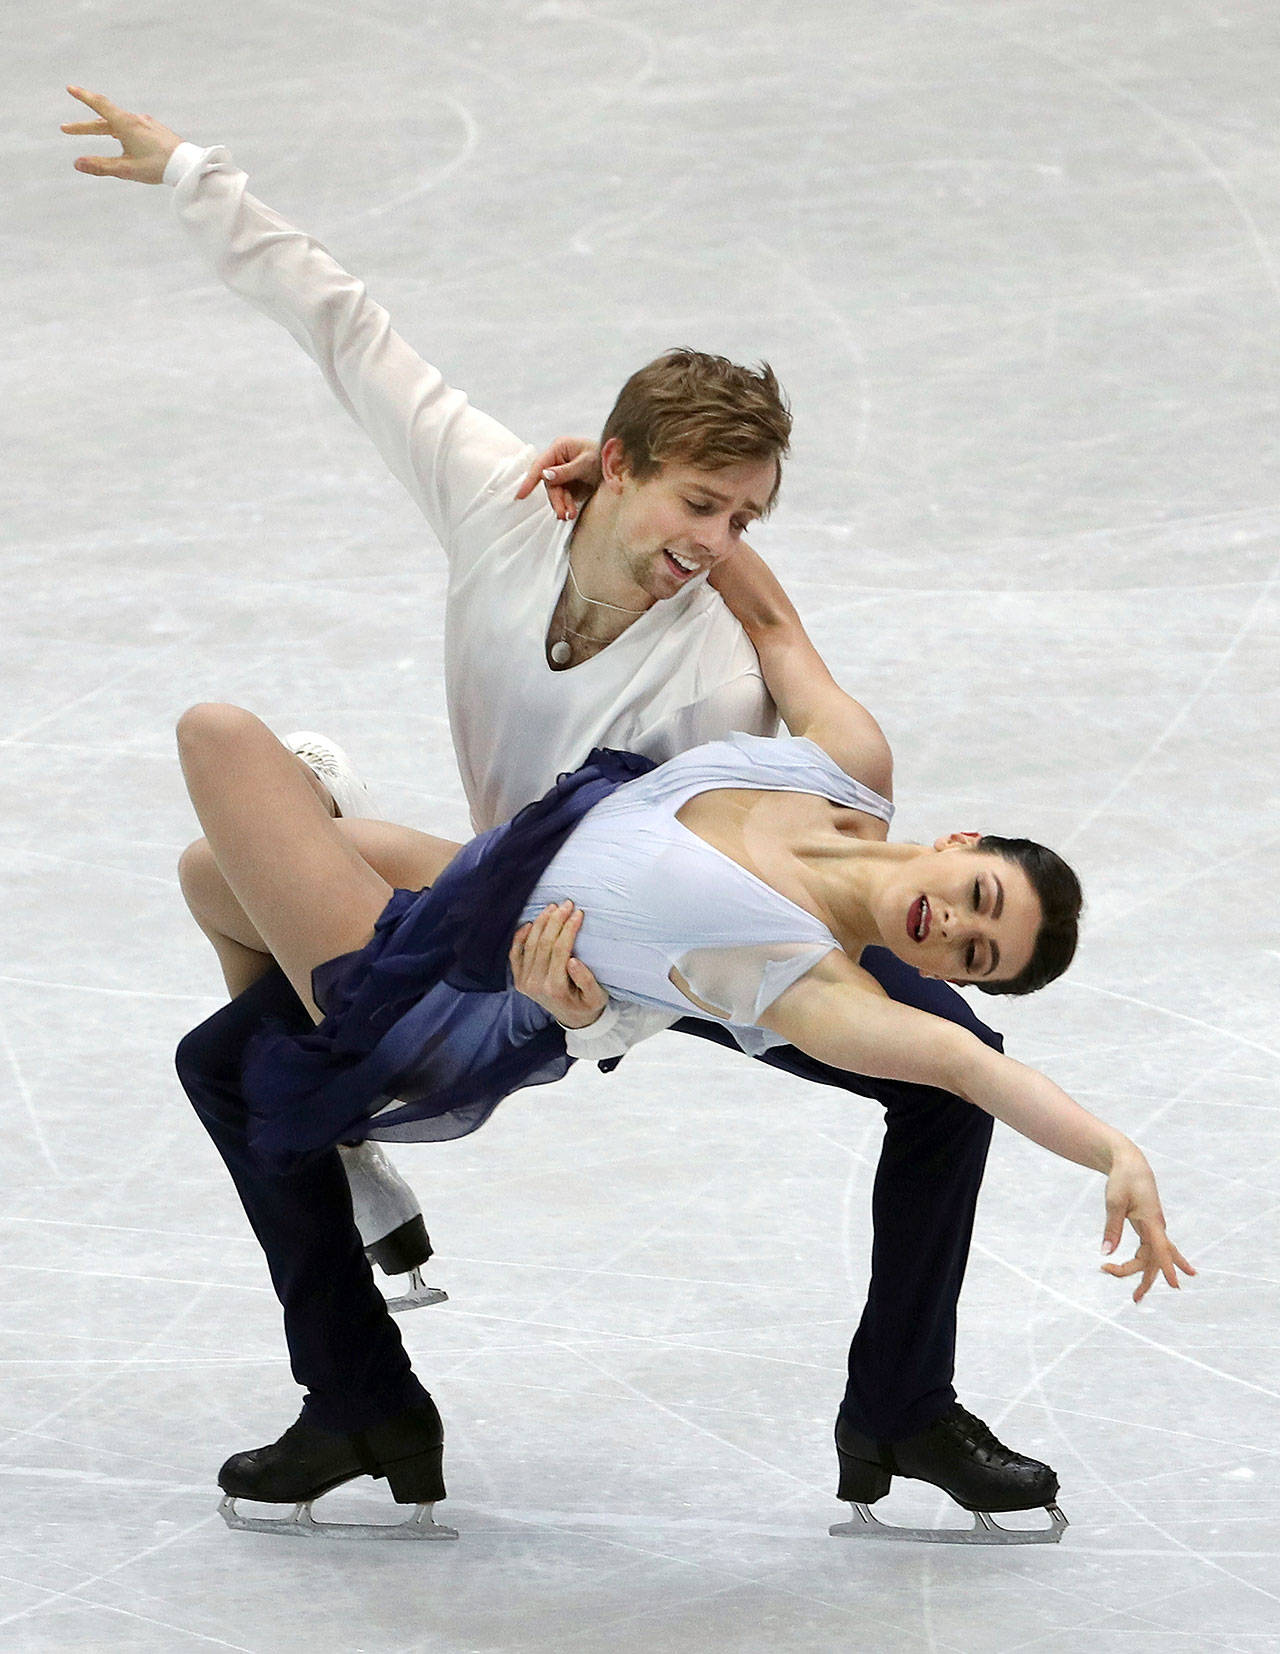 Jean-Luc Baker and Kaitlin Hawayek of the United States perform their free program in the ice dance event at the ISU Four Continents Figure Skating Championships on Thursday in Taipei, Taiwan. (AP Photo/Chiang Ying-ying)